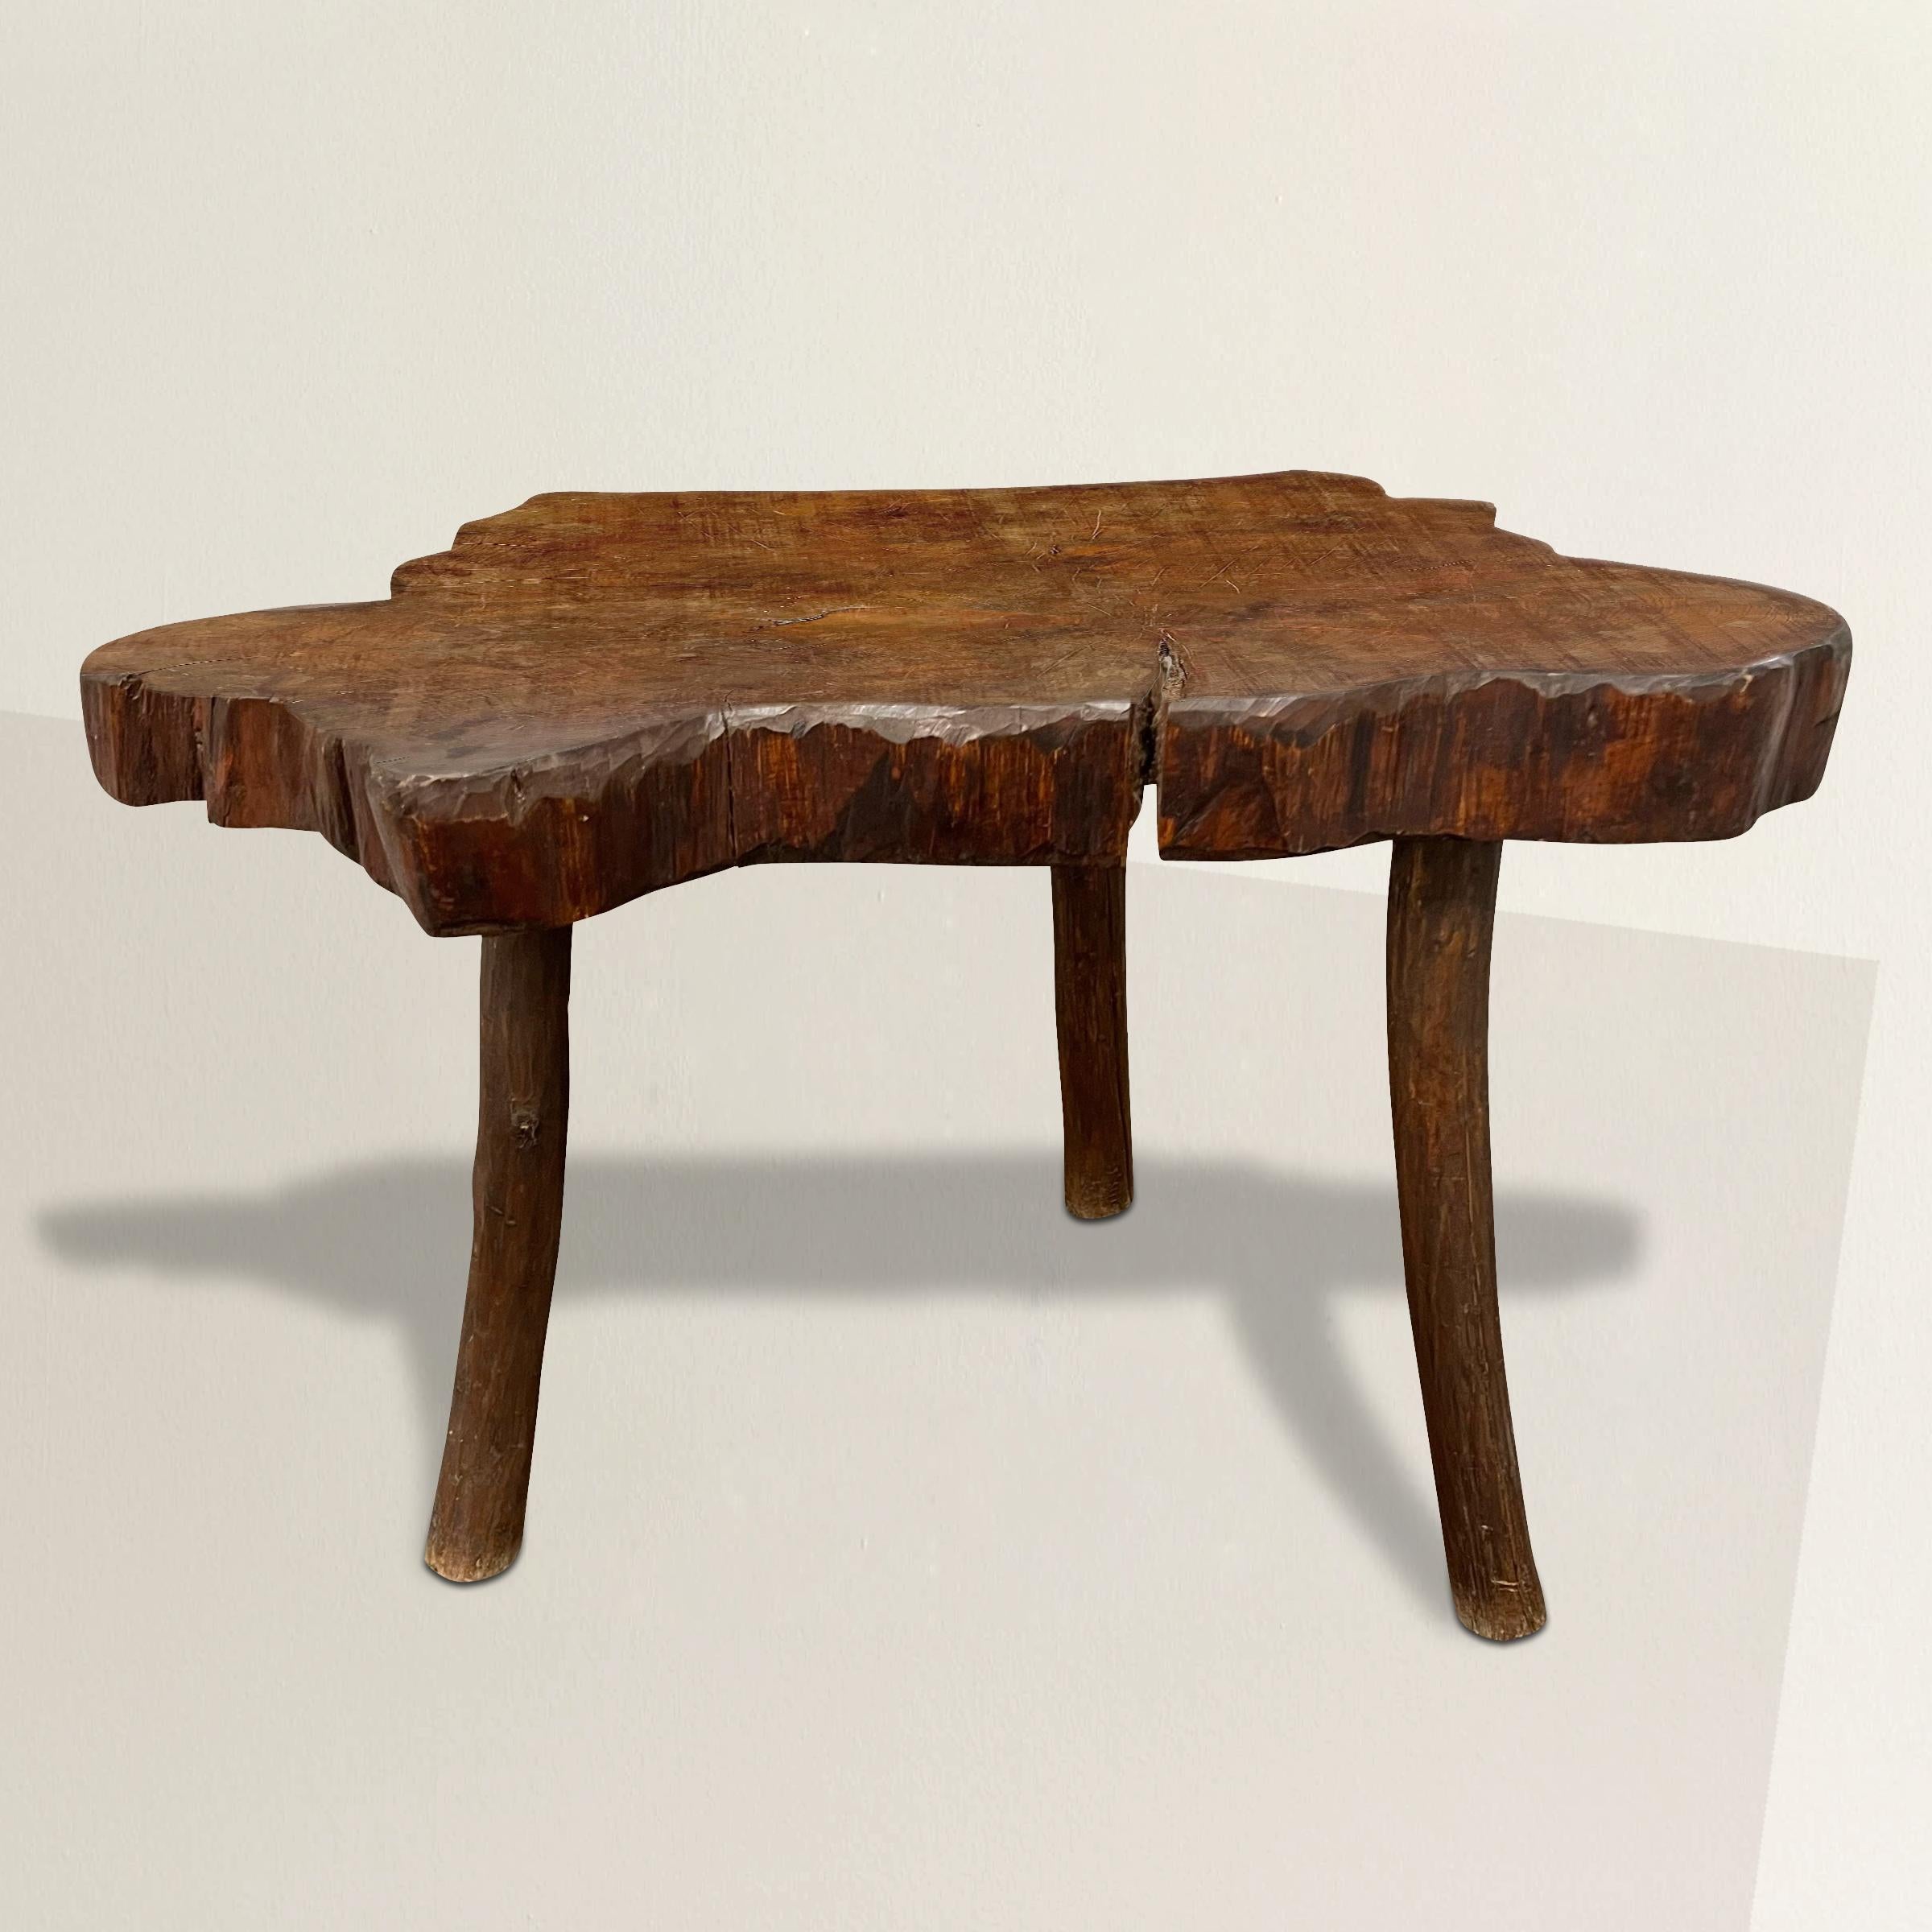 A beautiful mid-20th century French modern live-edge center table with a top made from one cross-section slab of a tree supported by three legs. The perfect table next to the sofa at your lake-side cottage, a console table in your chic city